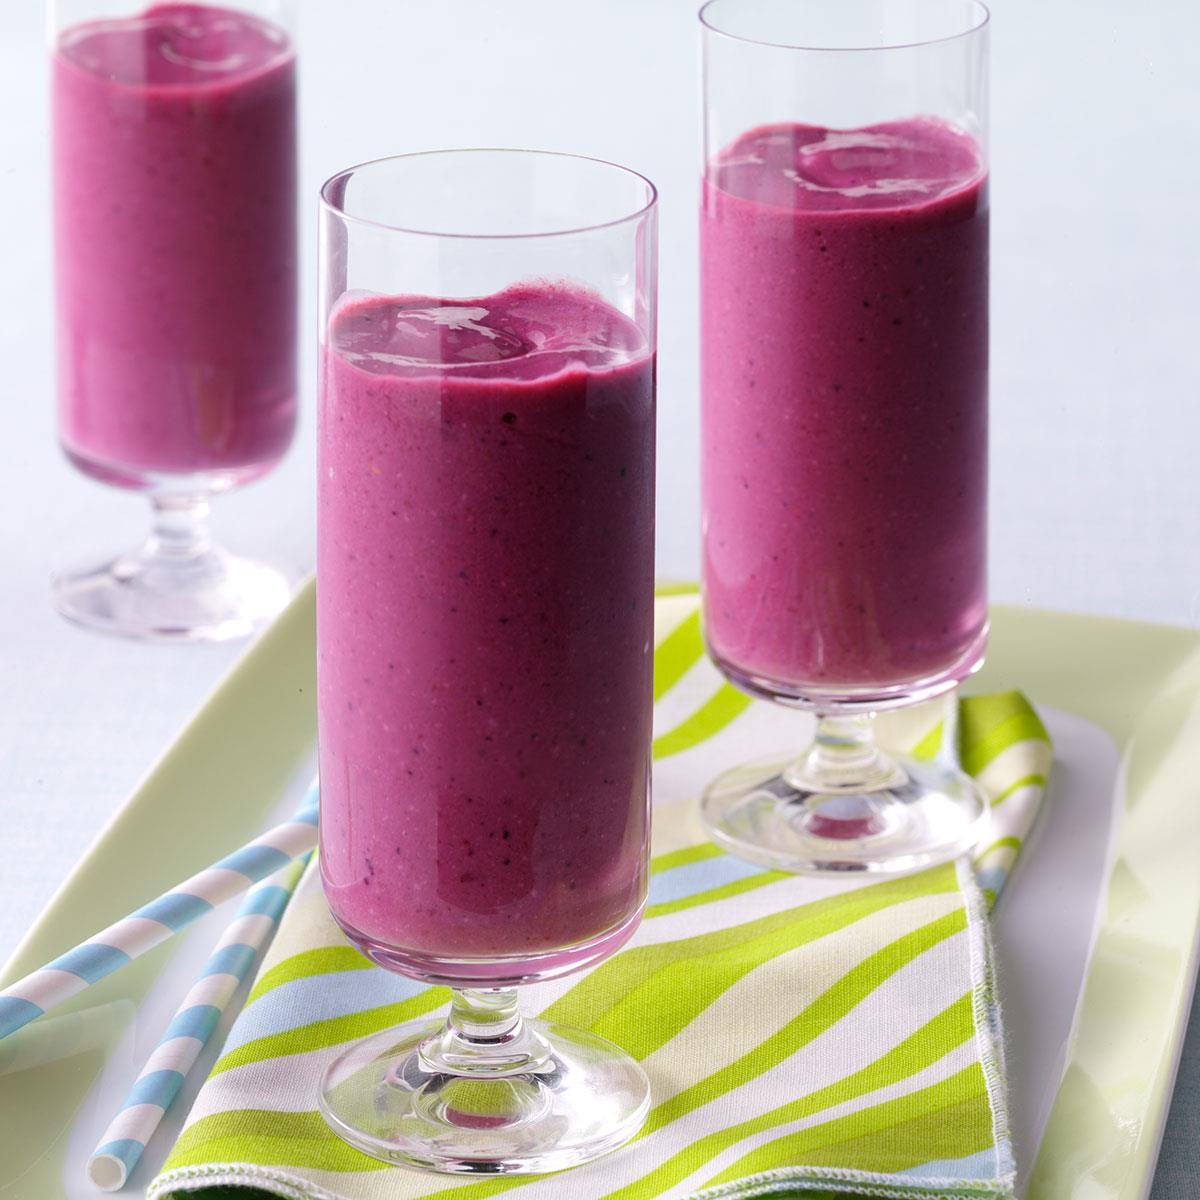 Creamy Berry Smoothies Recipe: How to Make It